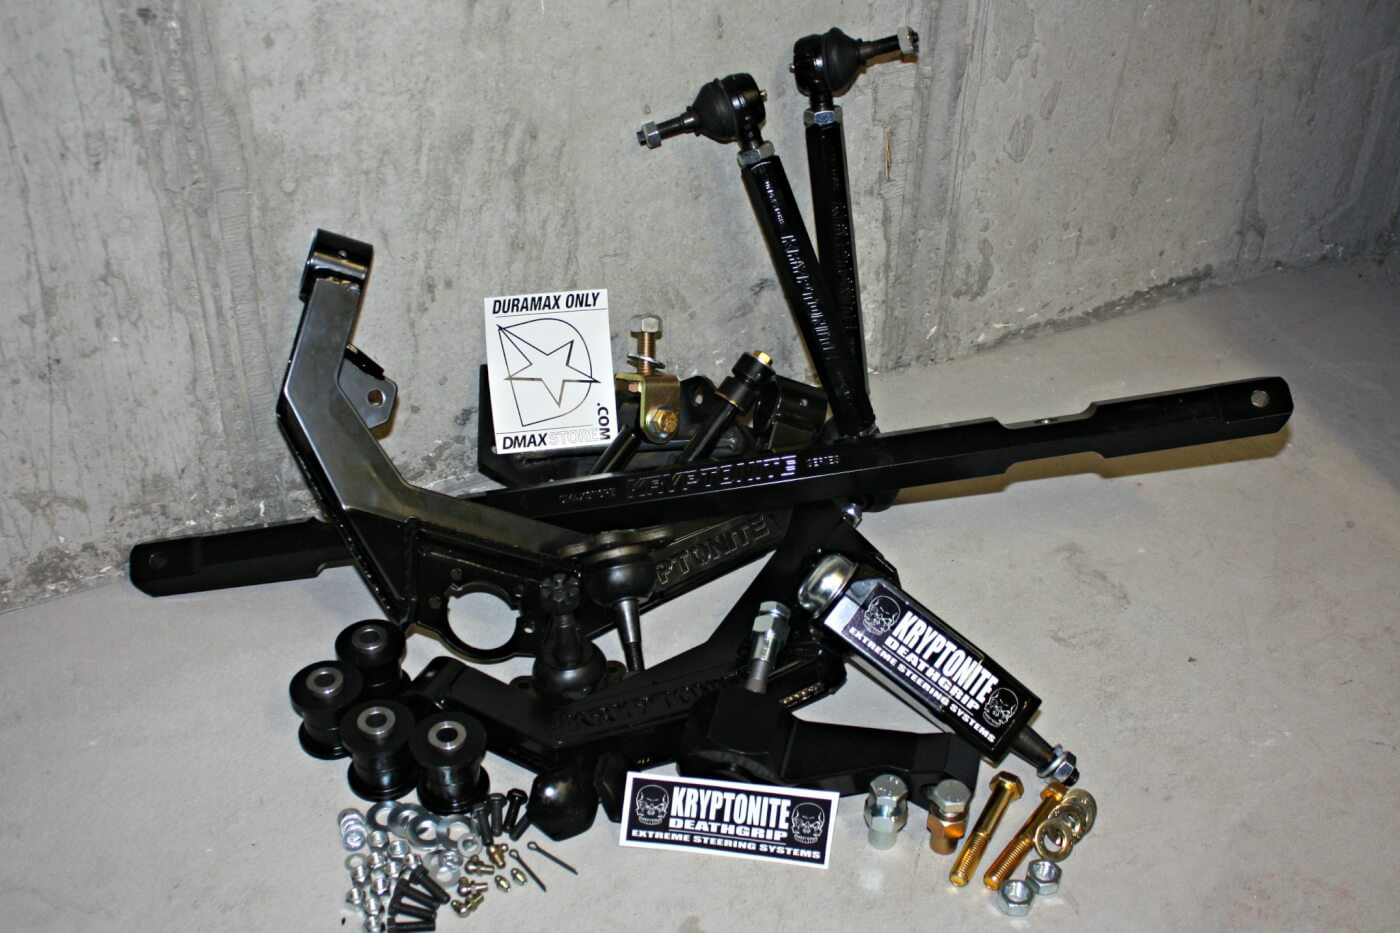 1. The Kryptonite Ultimate Front End Package paired with the Upper Control Arm kit from DmaxStore.com offers 2001-2010 GM owners a complete resolution to worn-out steering parts and improves front end strength, steering response, and ride quality. The kit works from stock to leveled trucks and is compatible with most aftermarket lift kit systems. Their lifetime warranty also ensures that this will be the last time you ever have to think about replacement parts.